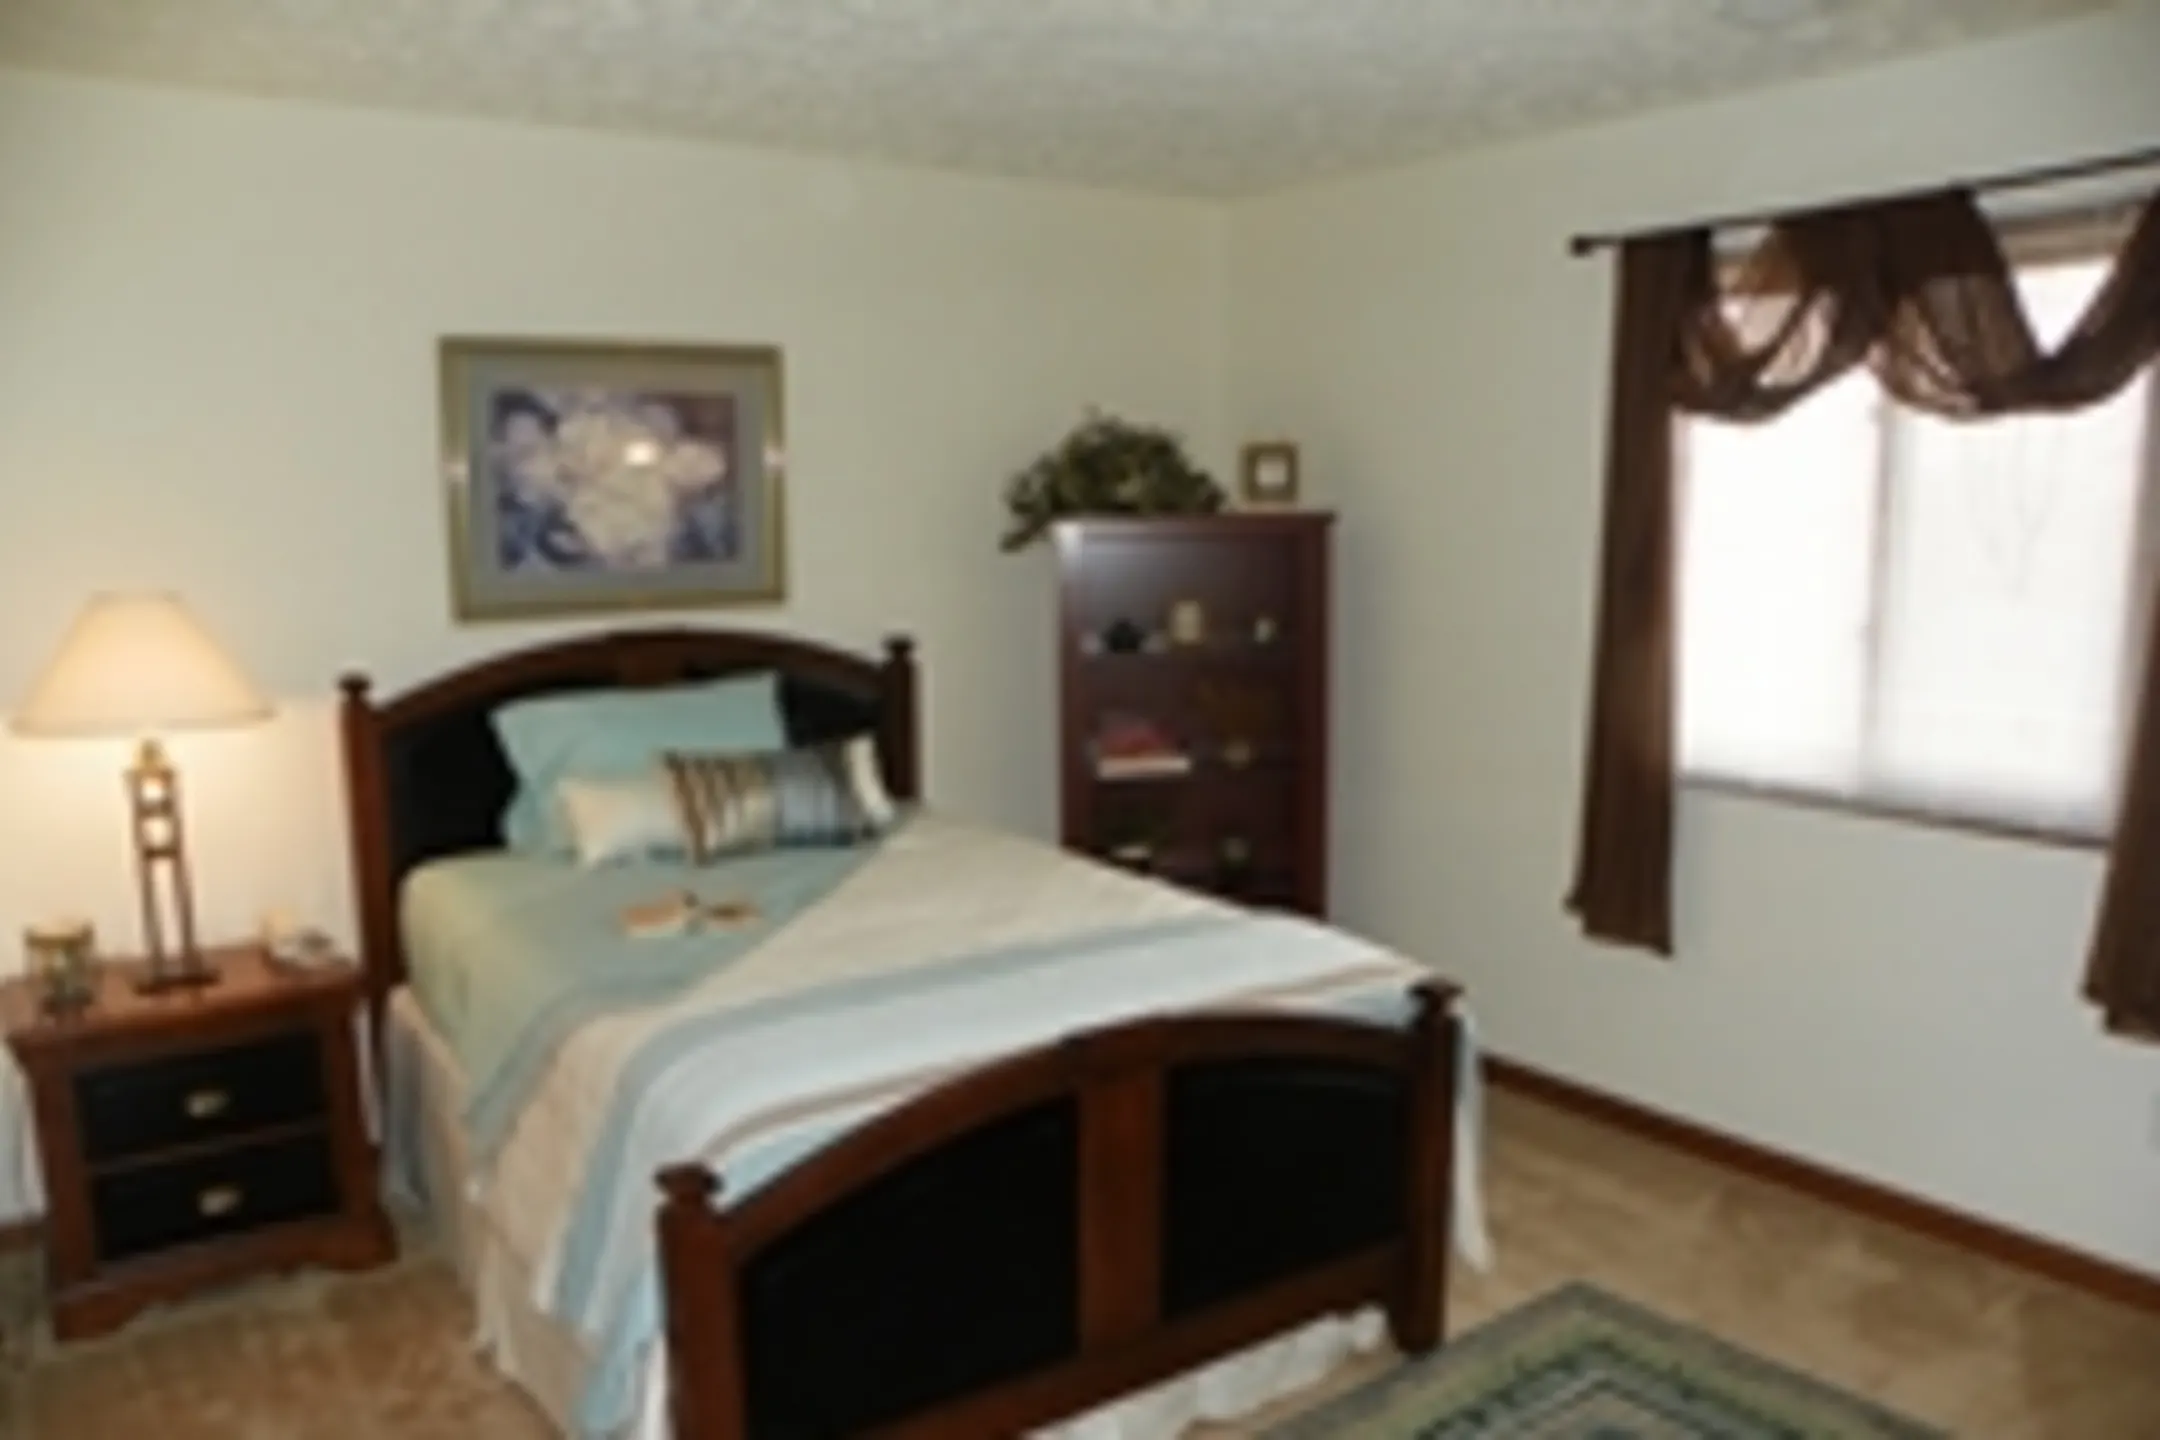 Bedroom - Greenfield Knoll - Greenfield, IN